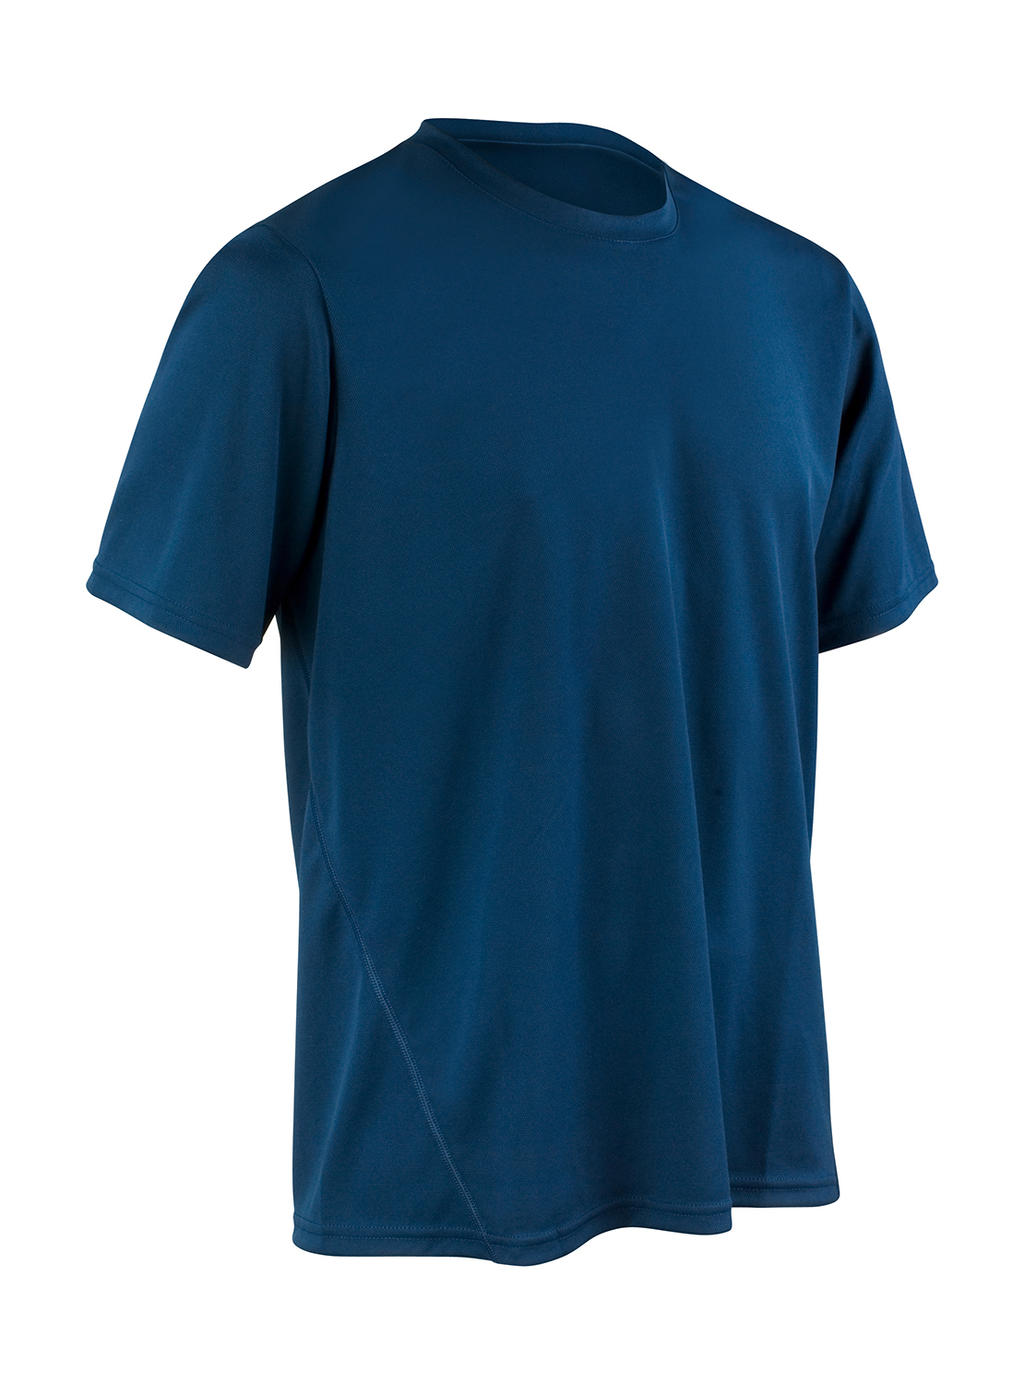  Performance T-Shirt in Farbe Navy